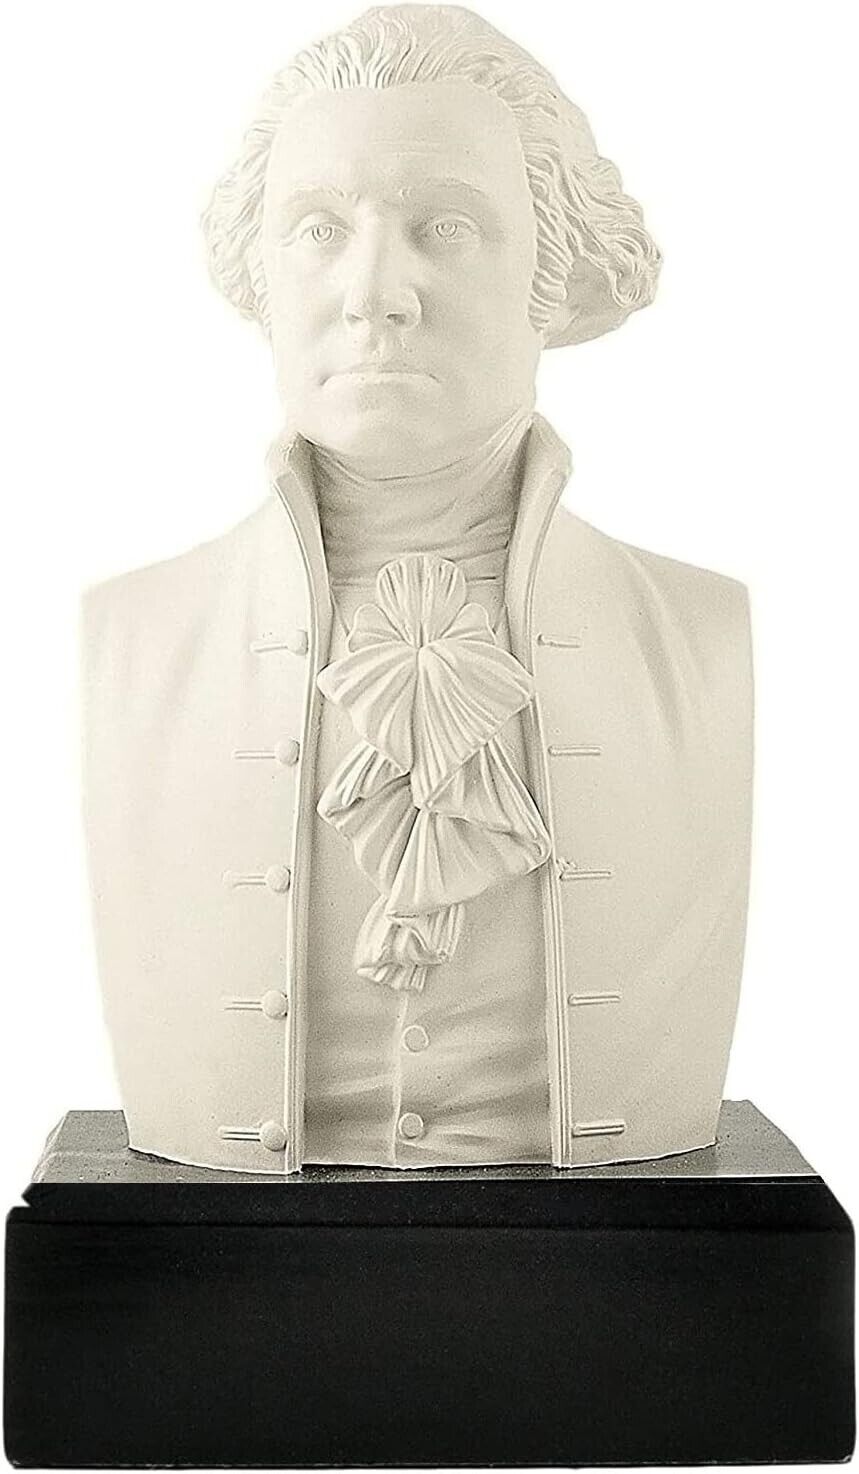 Historical George Washington Bust Statue Sculpture - Founding Father - MINT